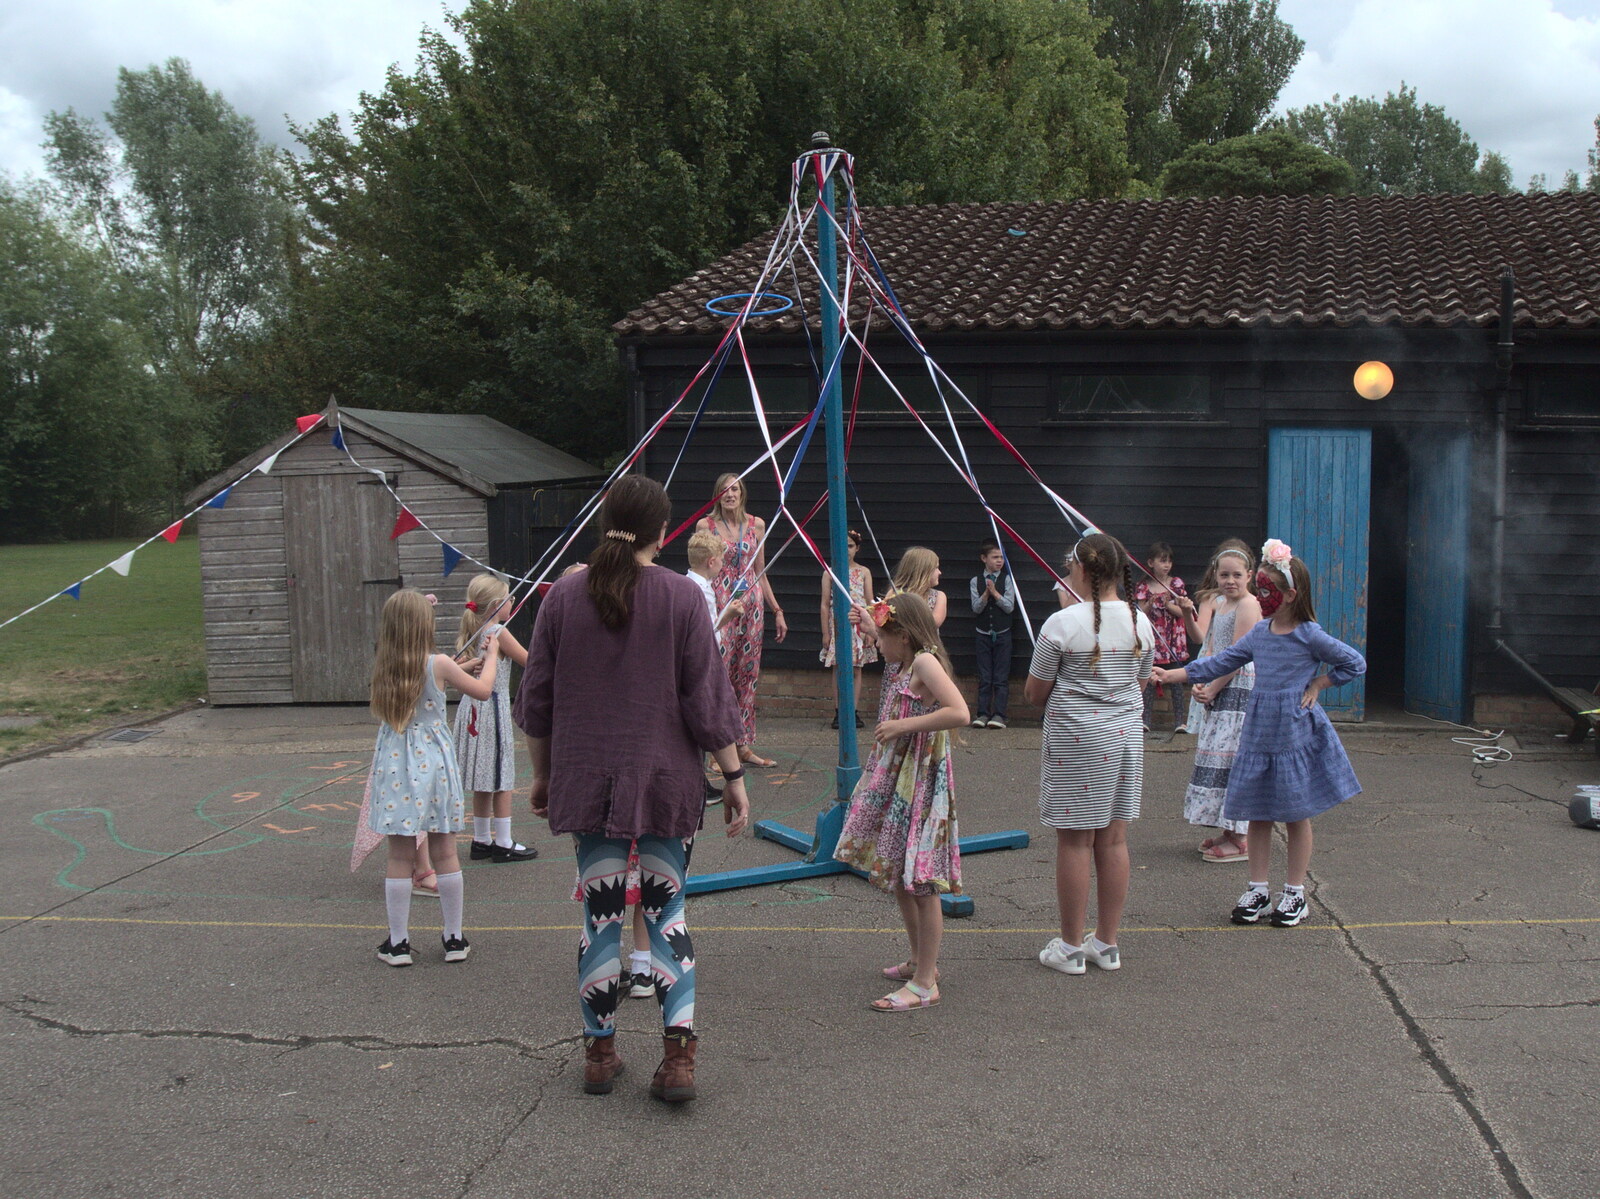 The traditional Maypole dance occurs from A Fire, a Fête, and a Scout Camp, Hallowtree, Suffolk - 30th June 2022